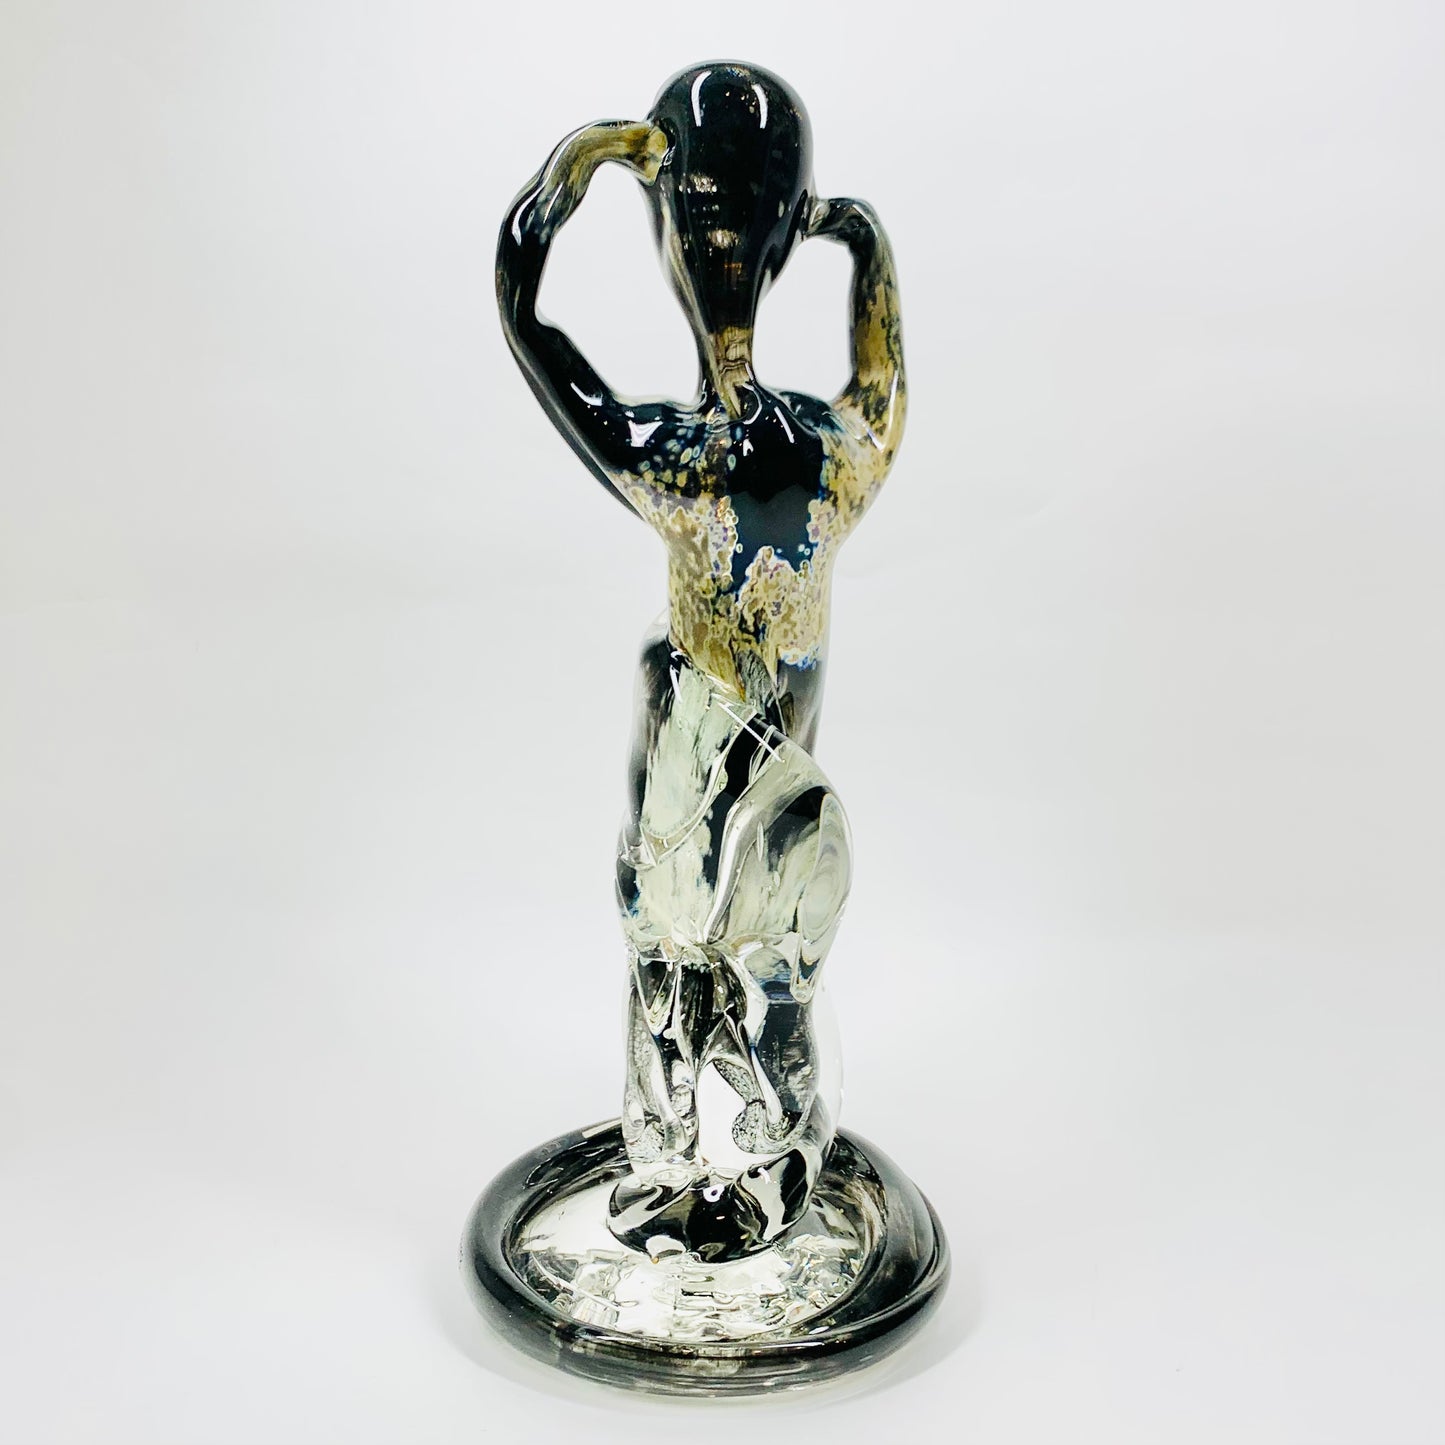 Vintage Murano abstract art glass sculpture of a dancer with aventurine